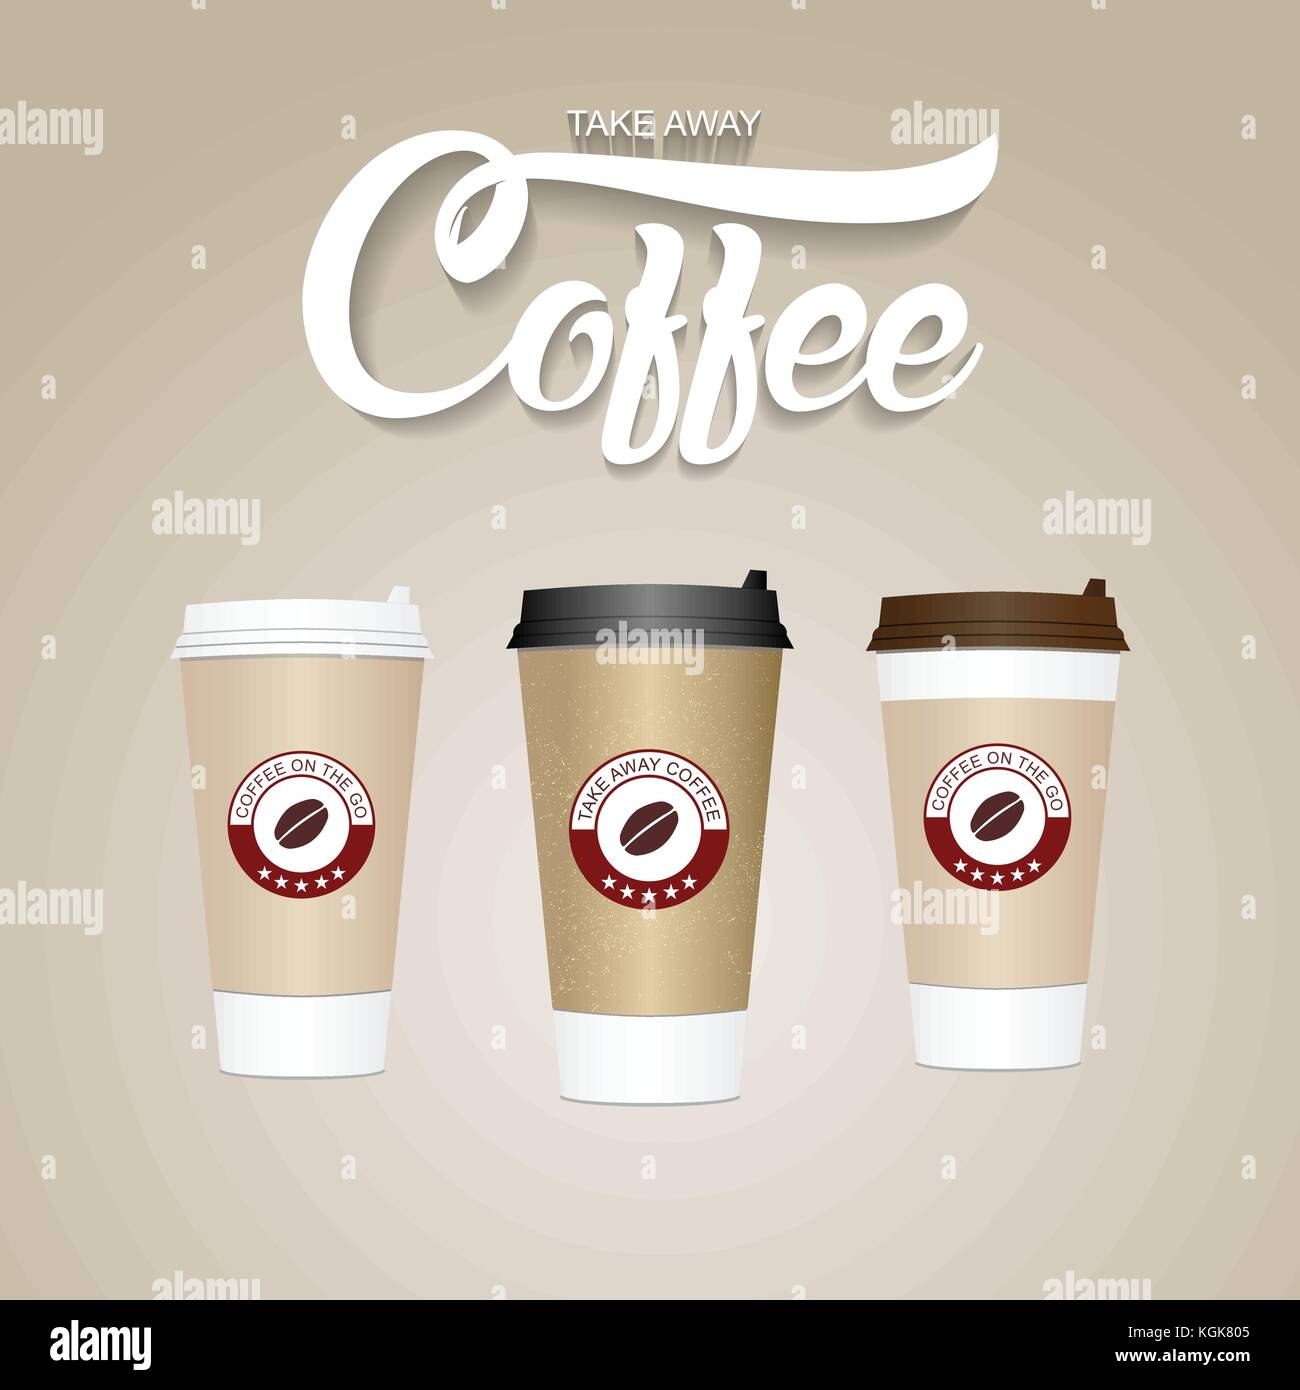 Takeaway coffee cup plastic Stock Vector Images - Page 2 - Alamy